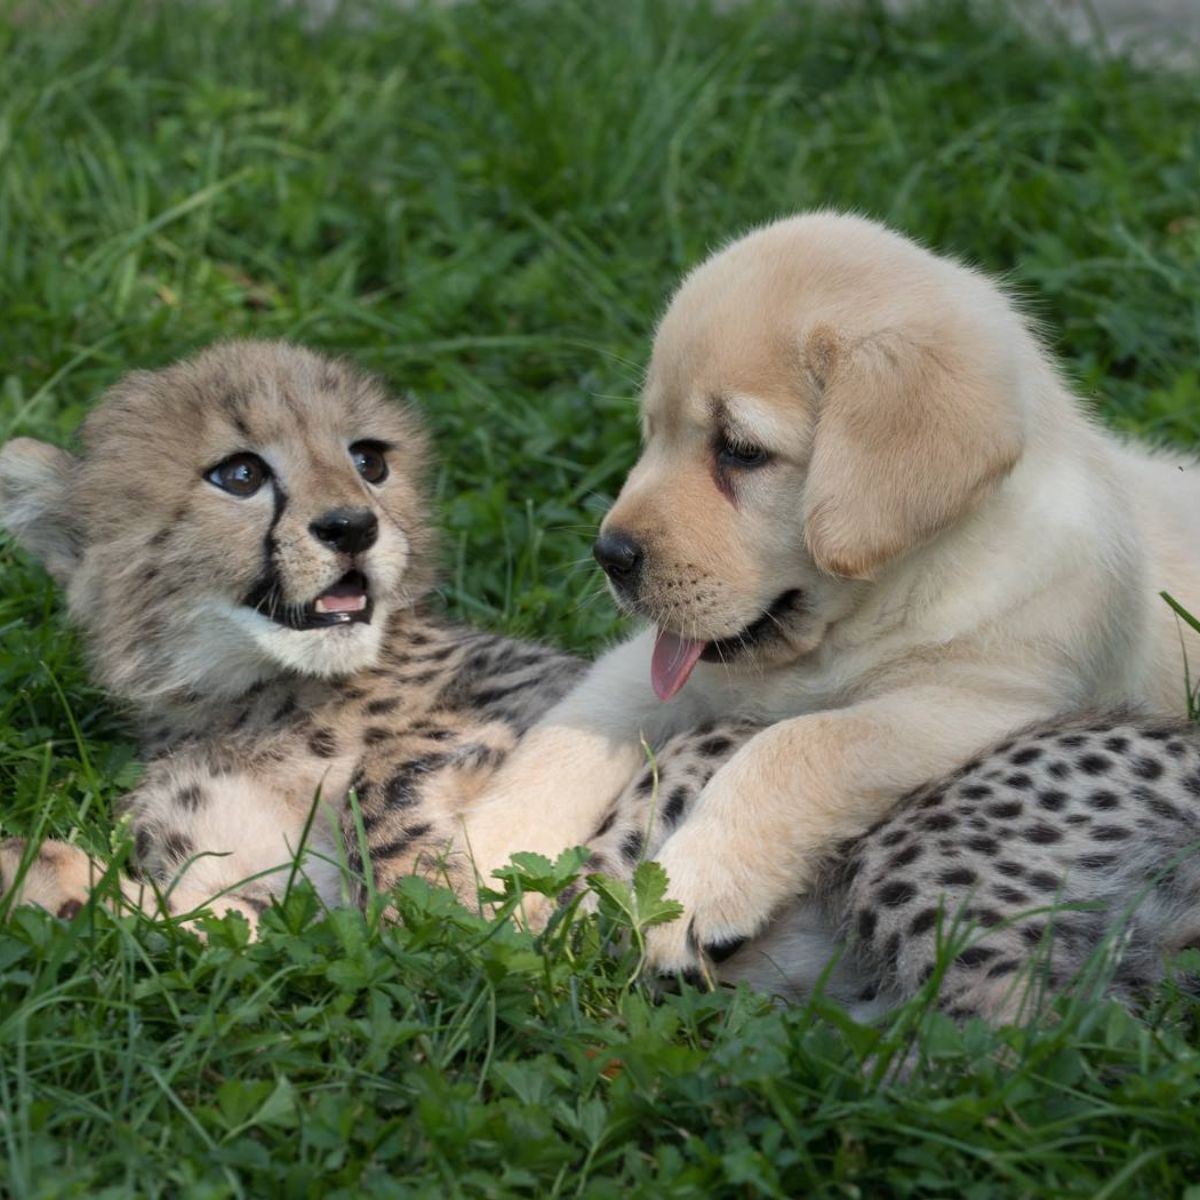 puppy and baby cheetah playing